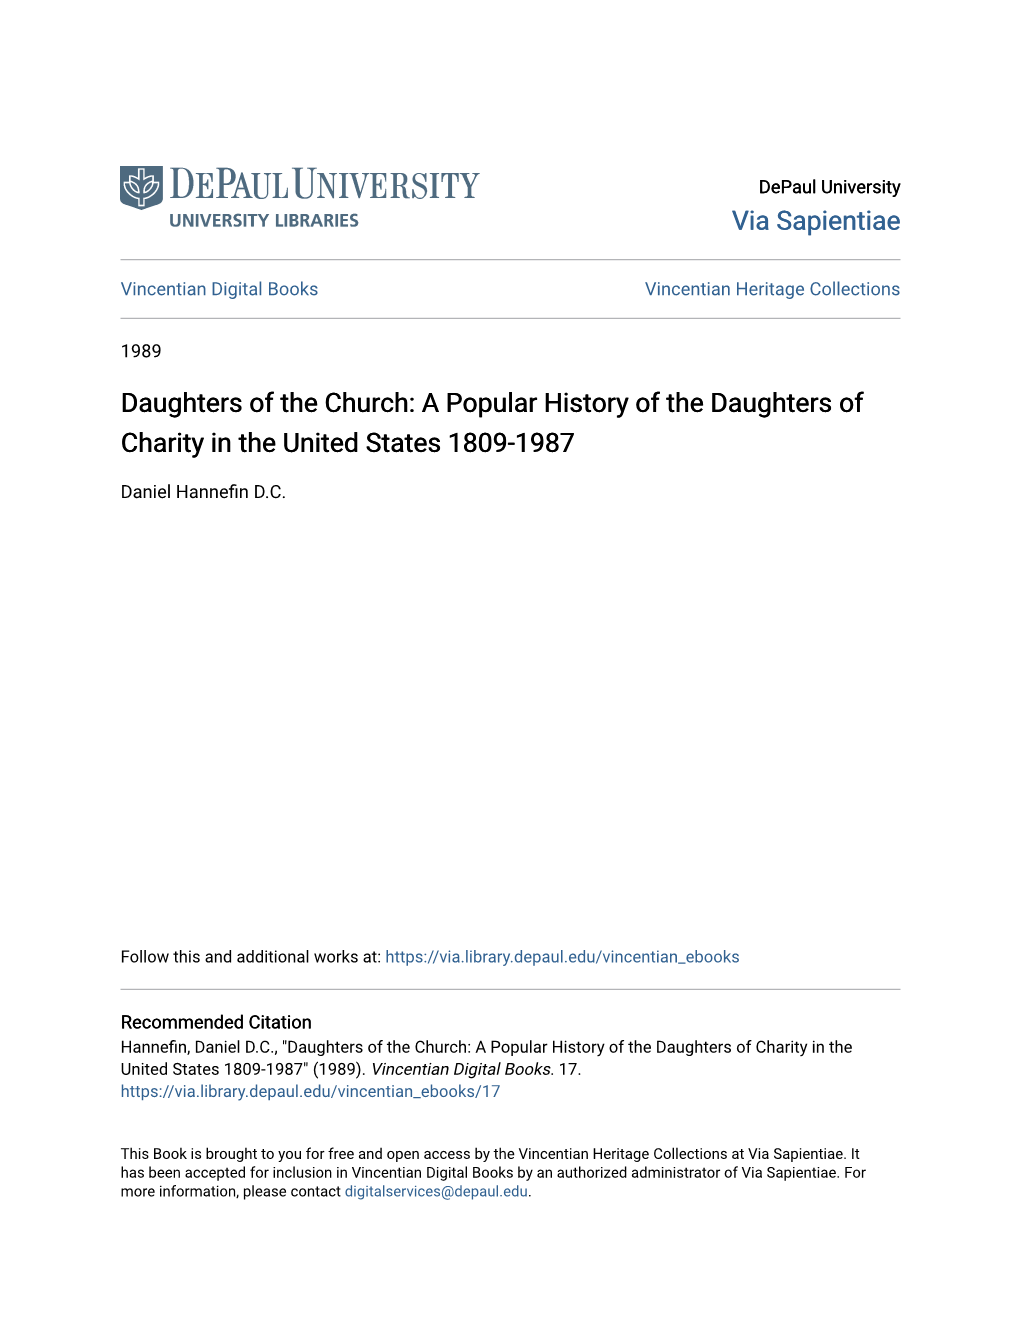 A Popular History of the Daughters of Charity in the United States 1809-1987